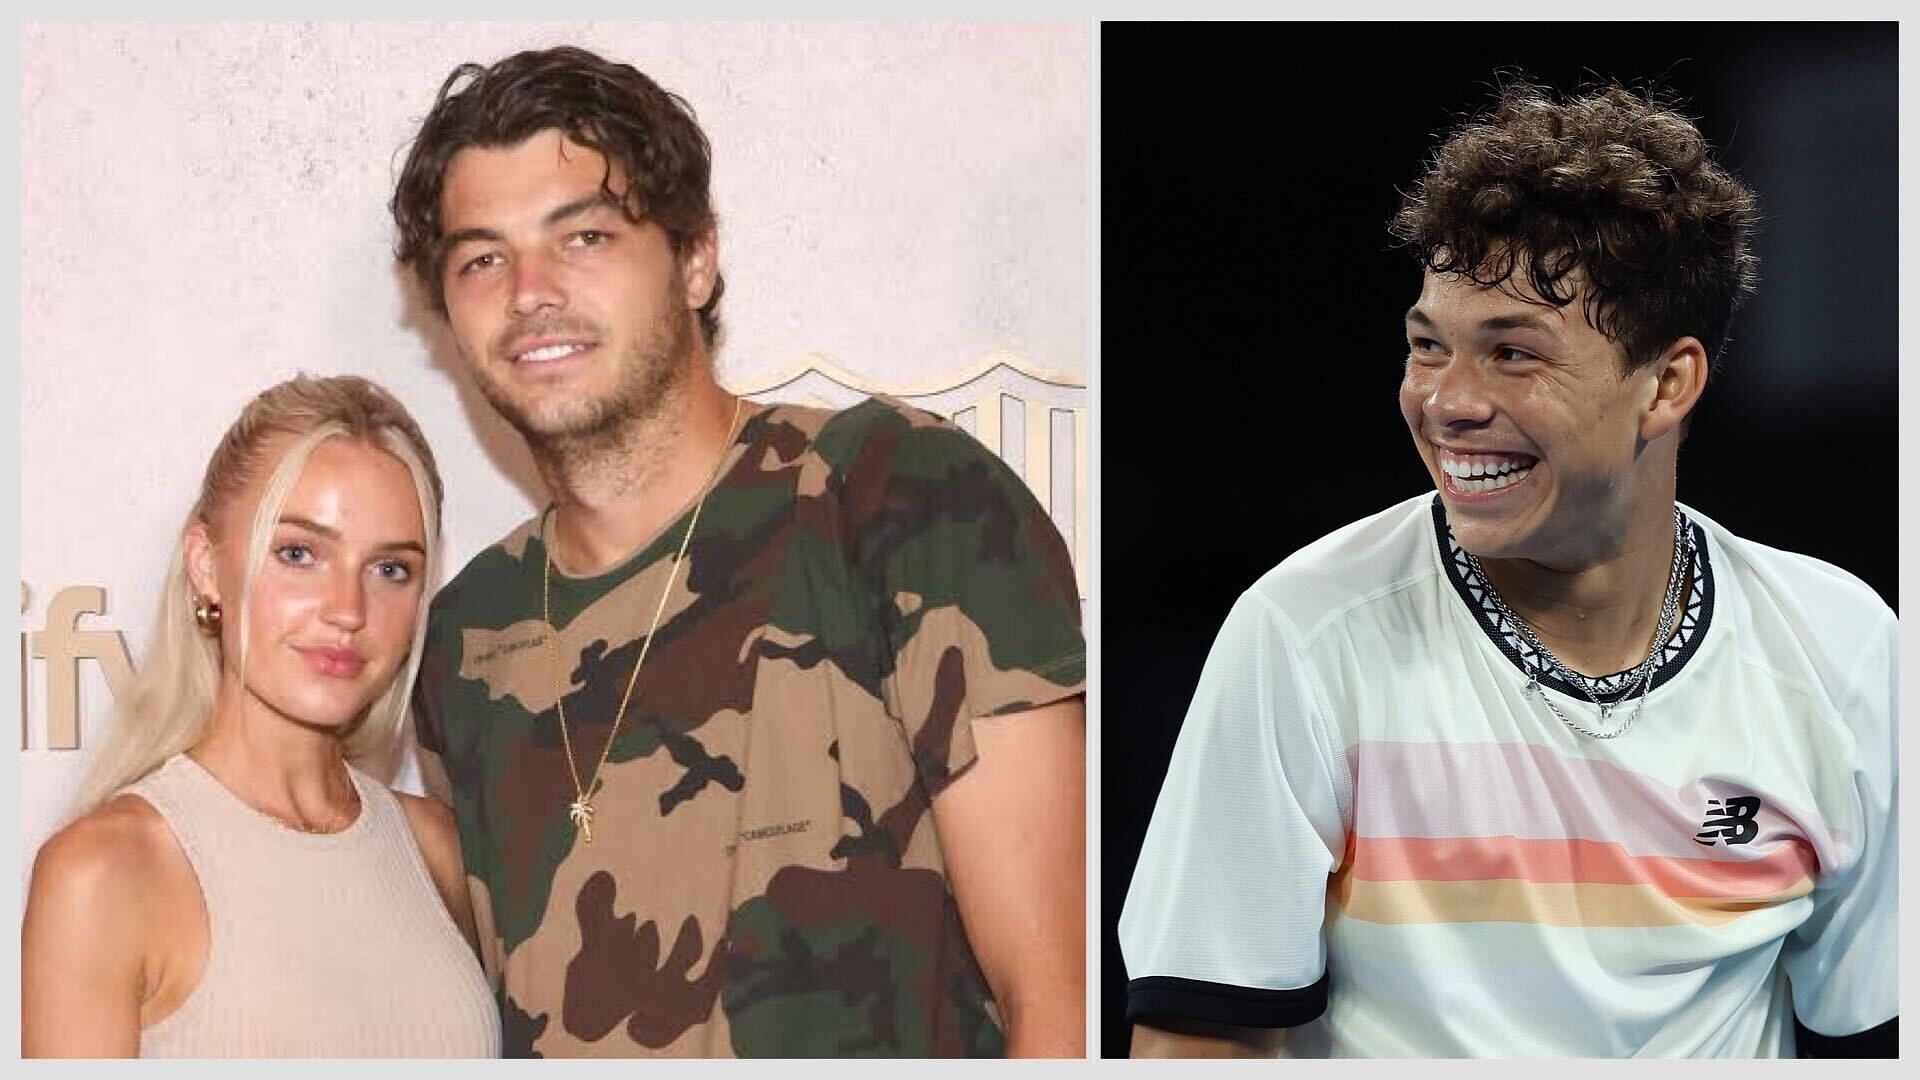 Taylor Fritz with girlfriend Morgan Riddle(left) and Ben Shelton(right)